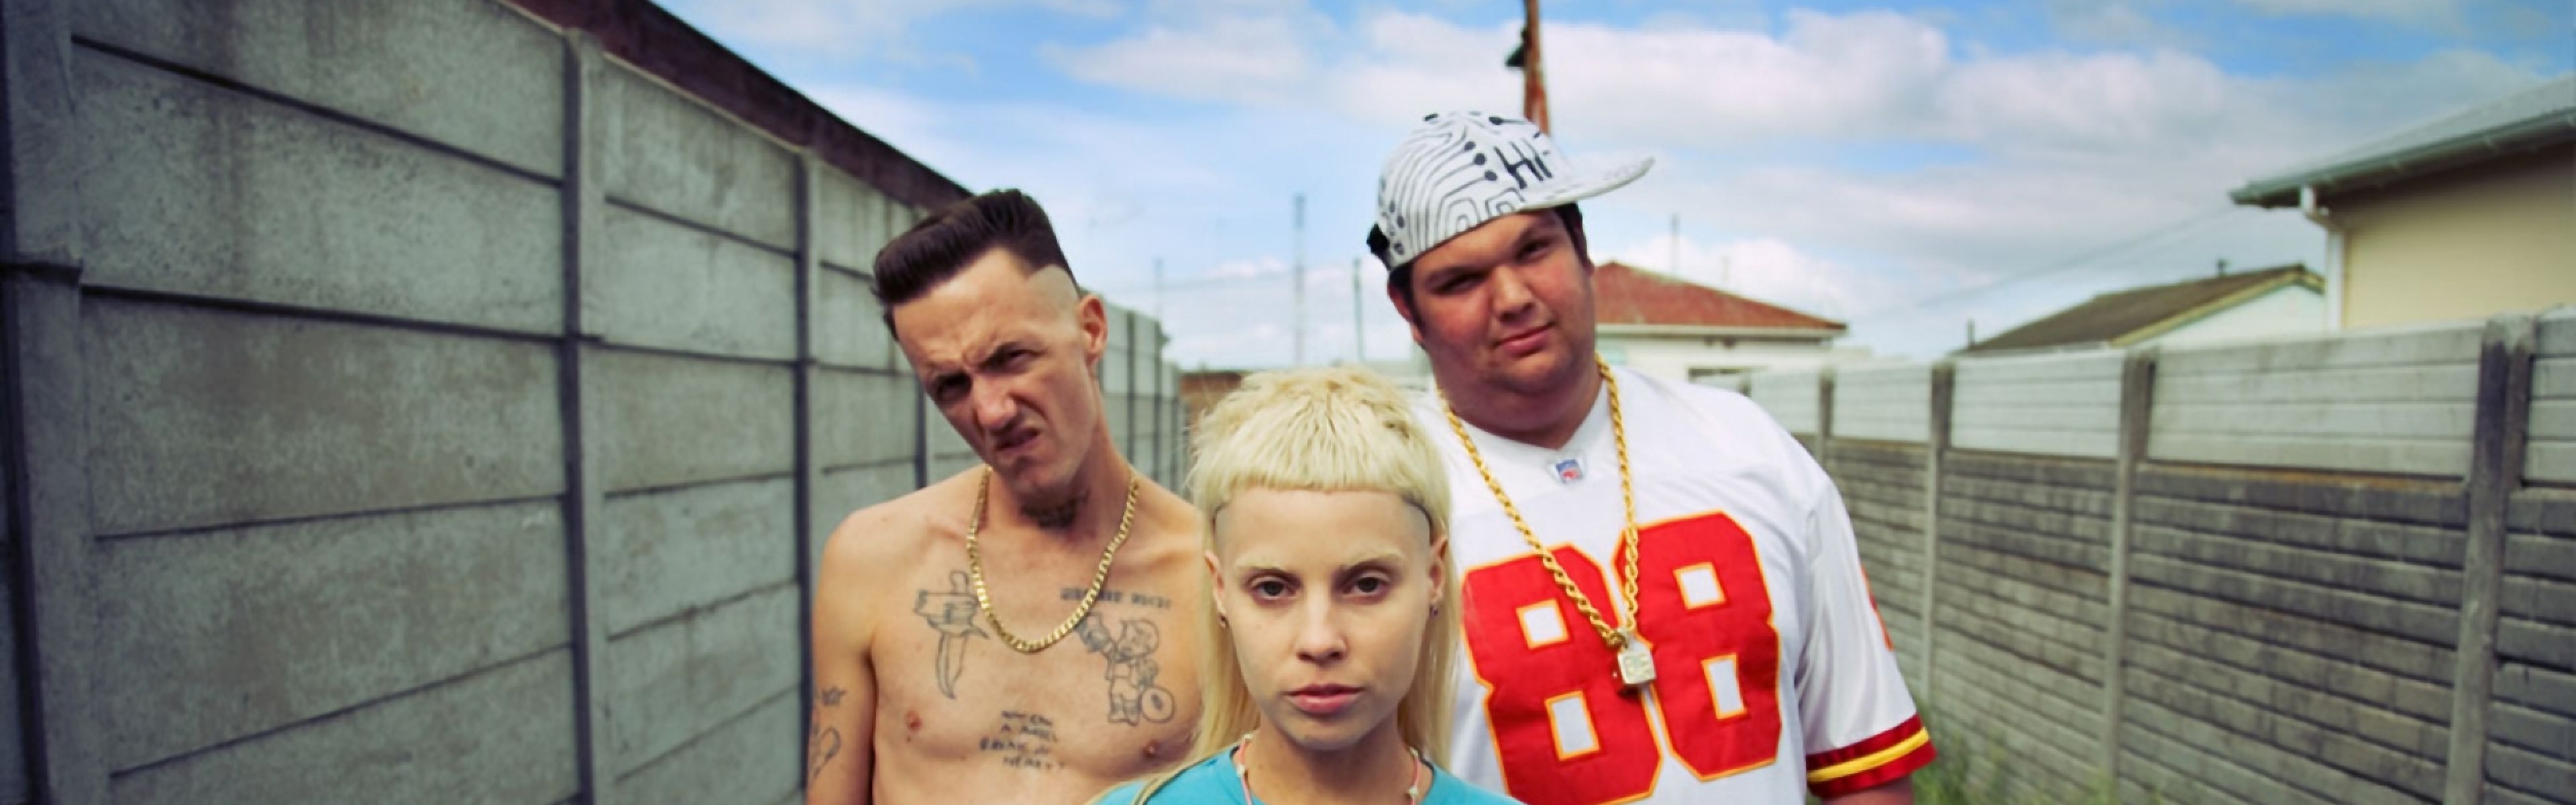 3840x1200 Preview die antwoord